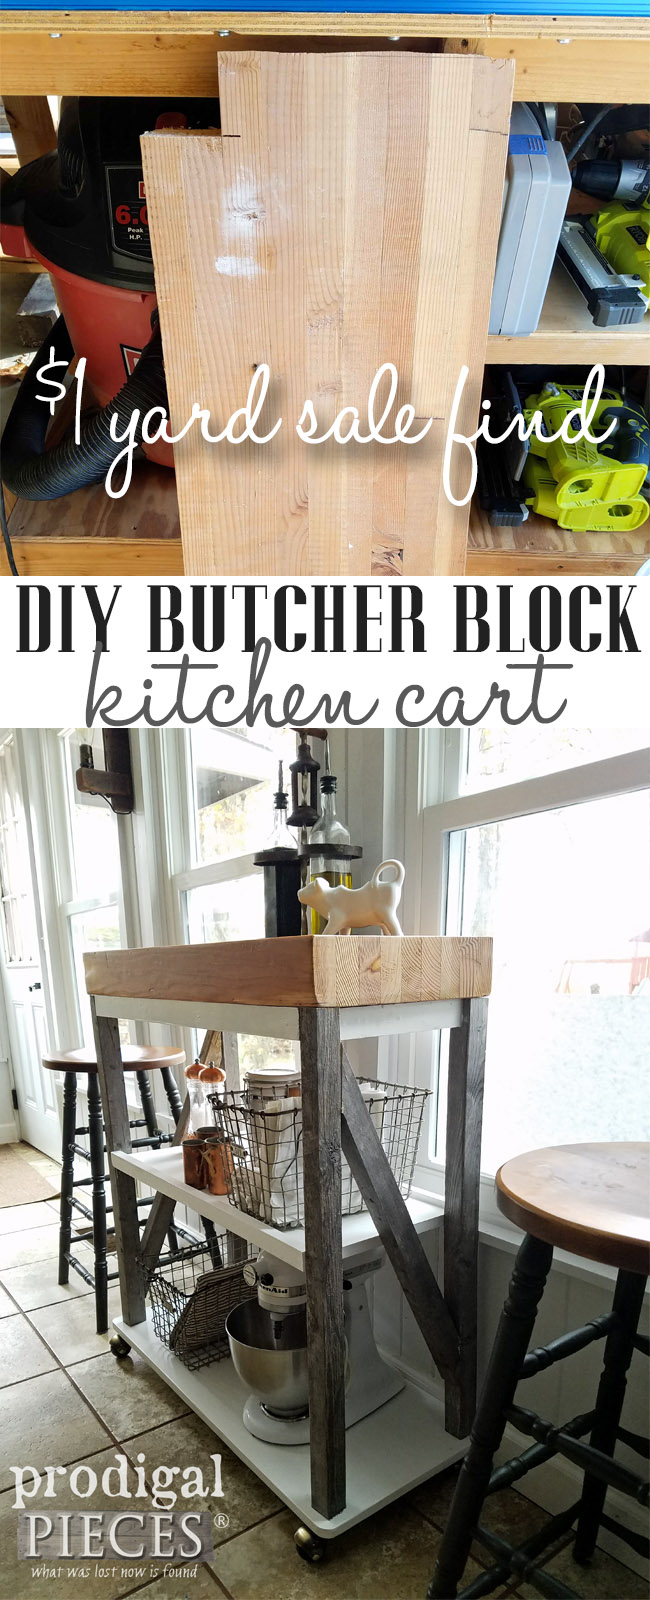 Check it out! A $1 garage sale find gets turned into a DIY Butcher Block Cart built by Larissa of Prodigal Pieces | prodigalpieces.com